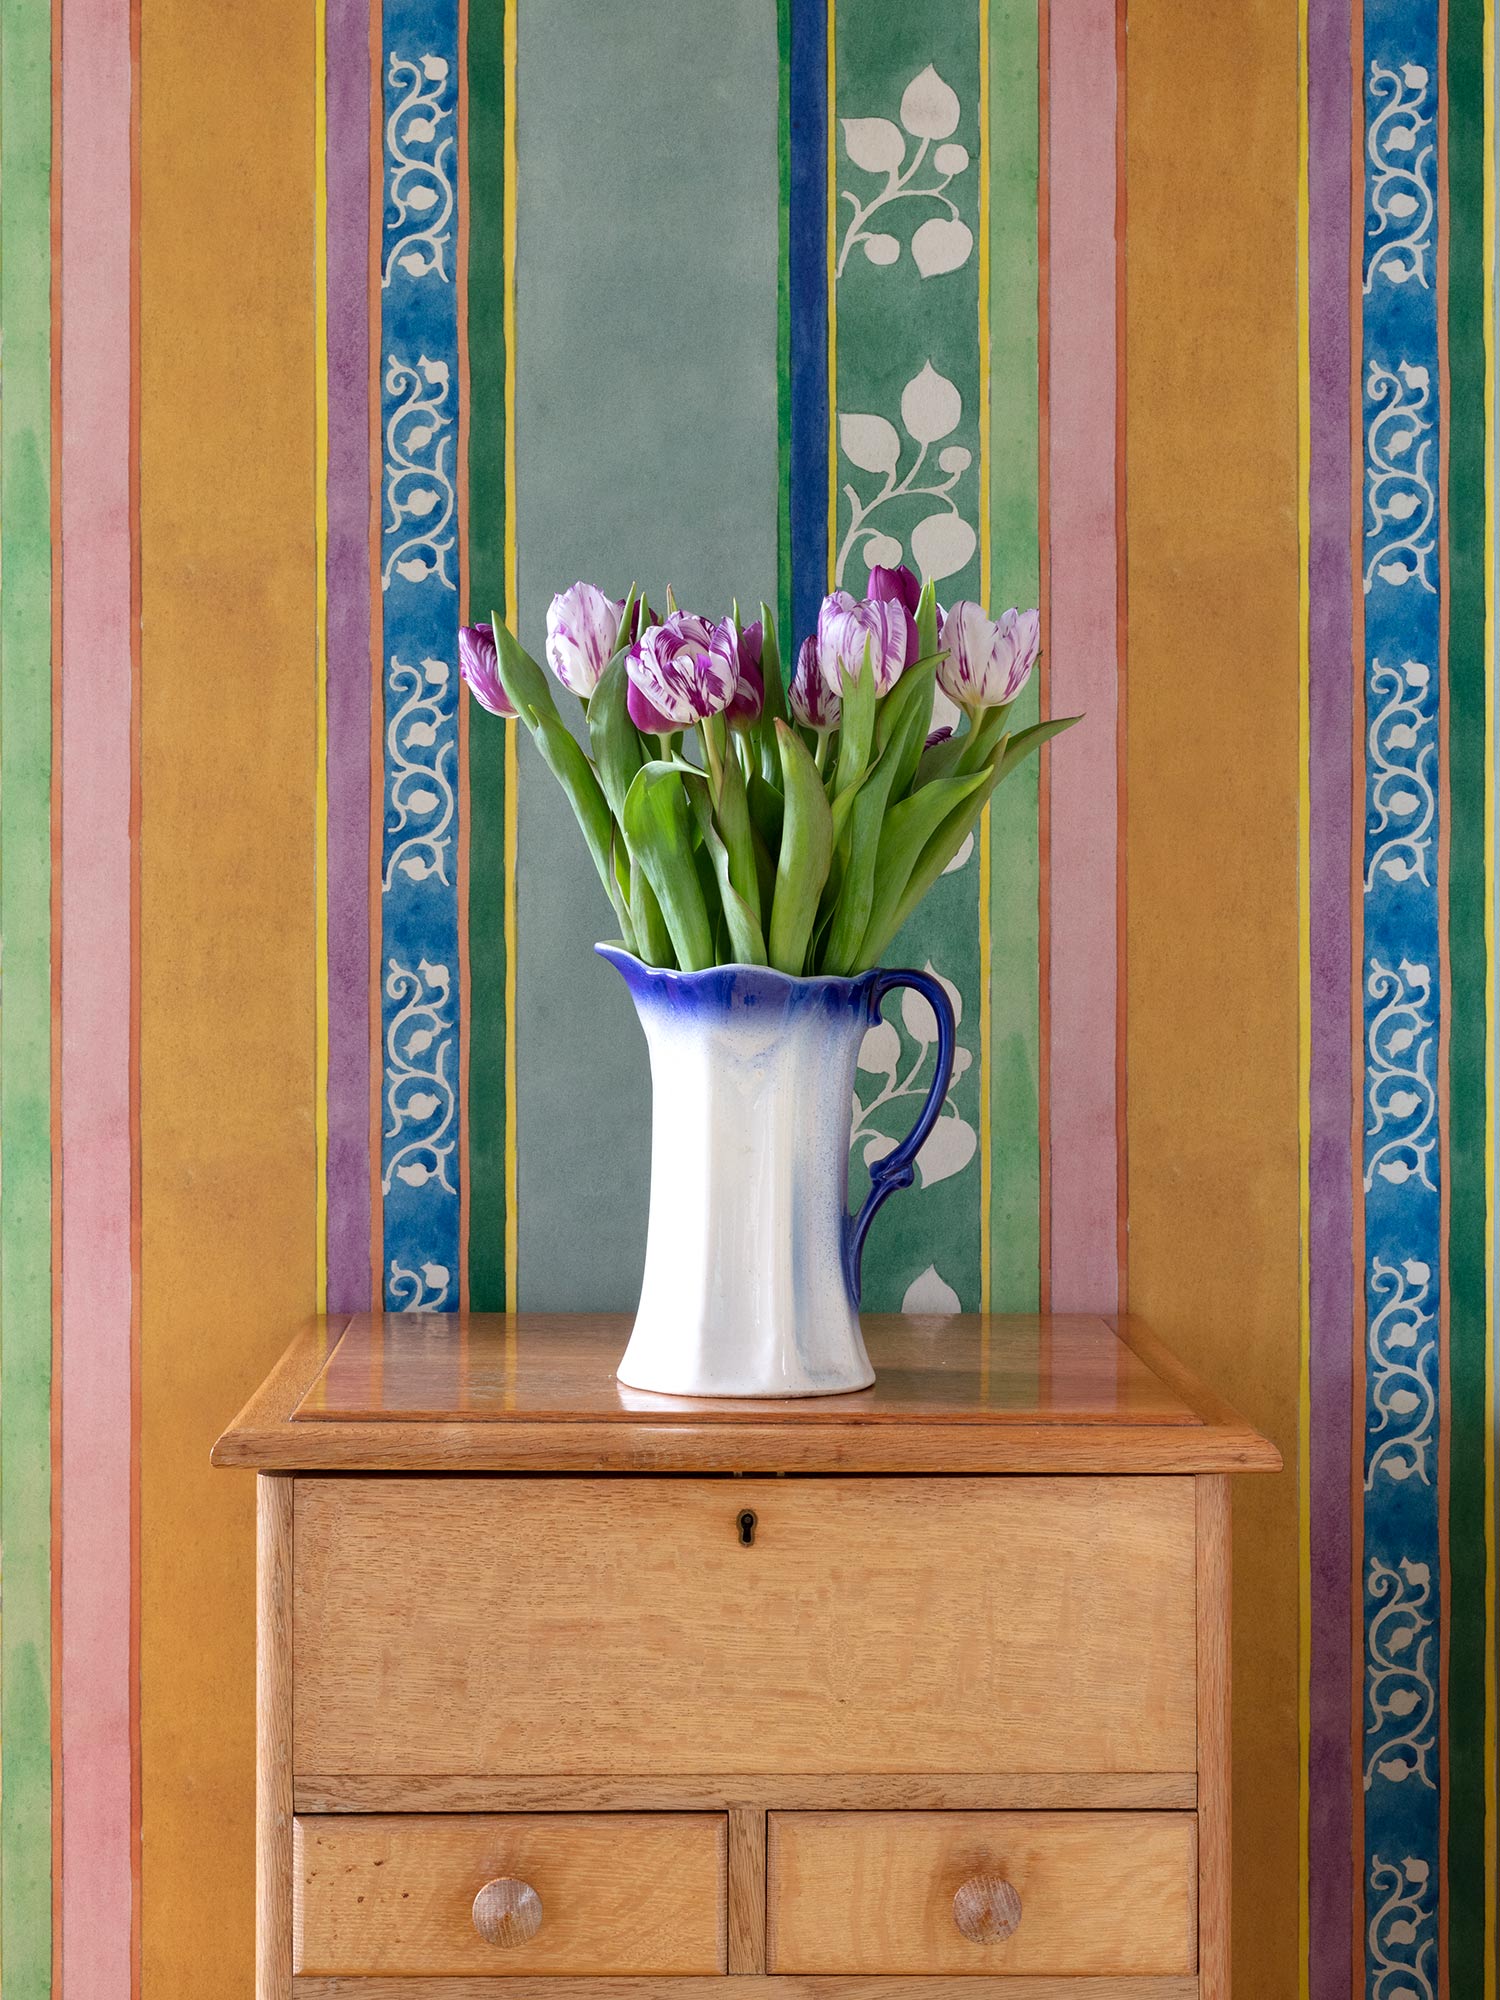 Striped green, pink, orange and blue wallpaper from 1918 by Arts & Crafts artist CFA Voysey, pictured with flowers in jug